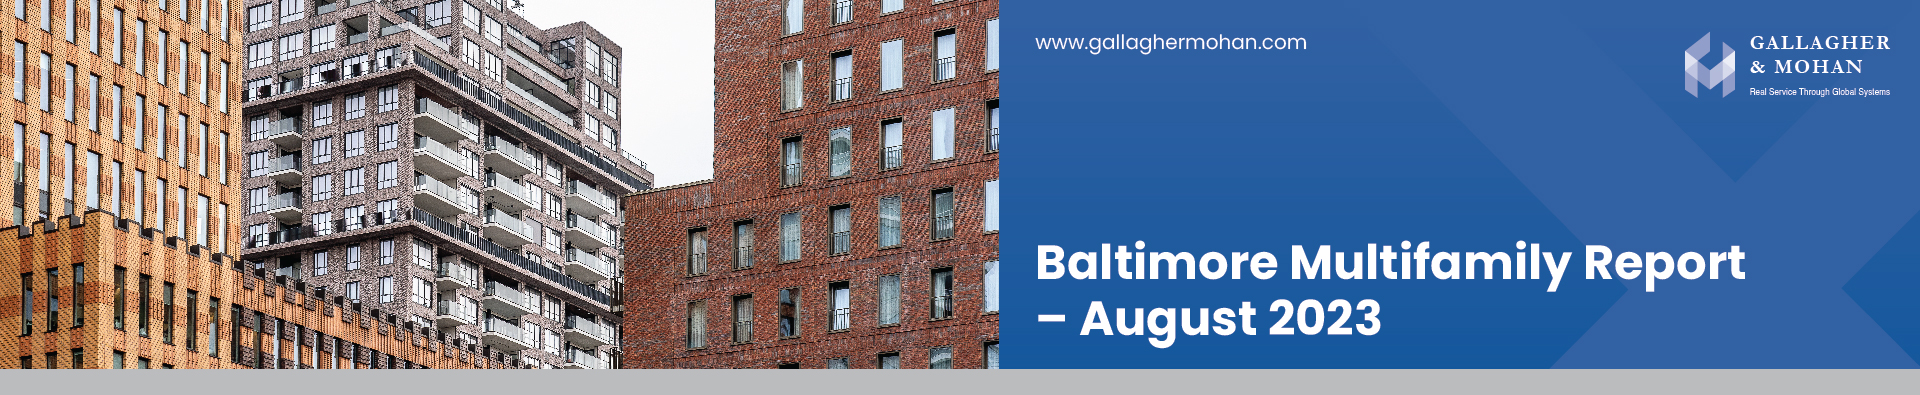 Baltimore Multifamily Report – August 2023